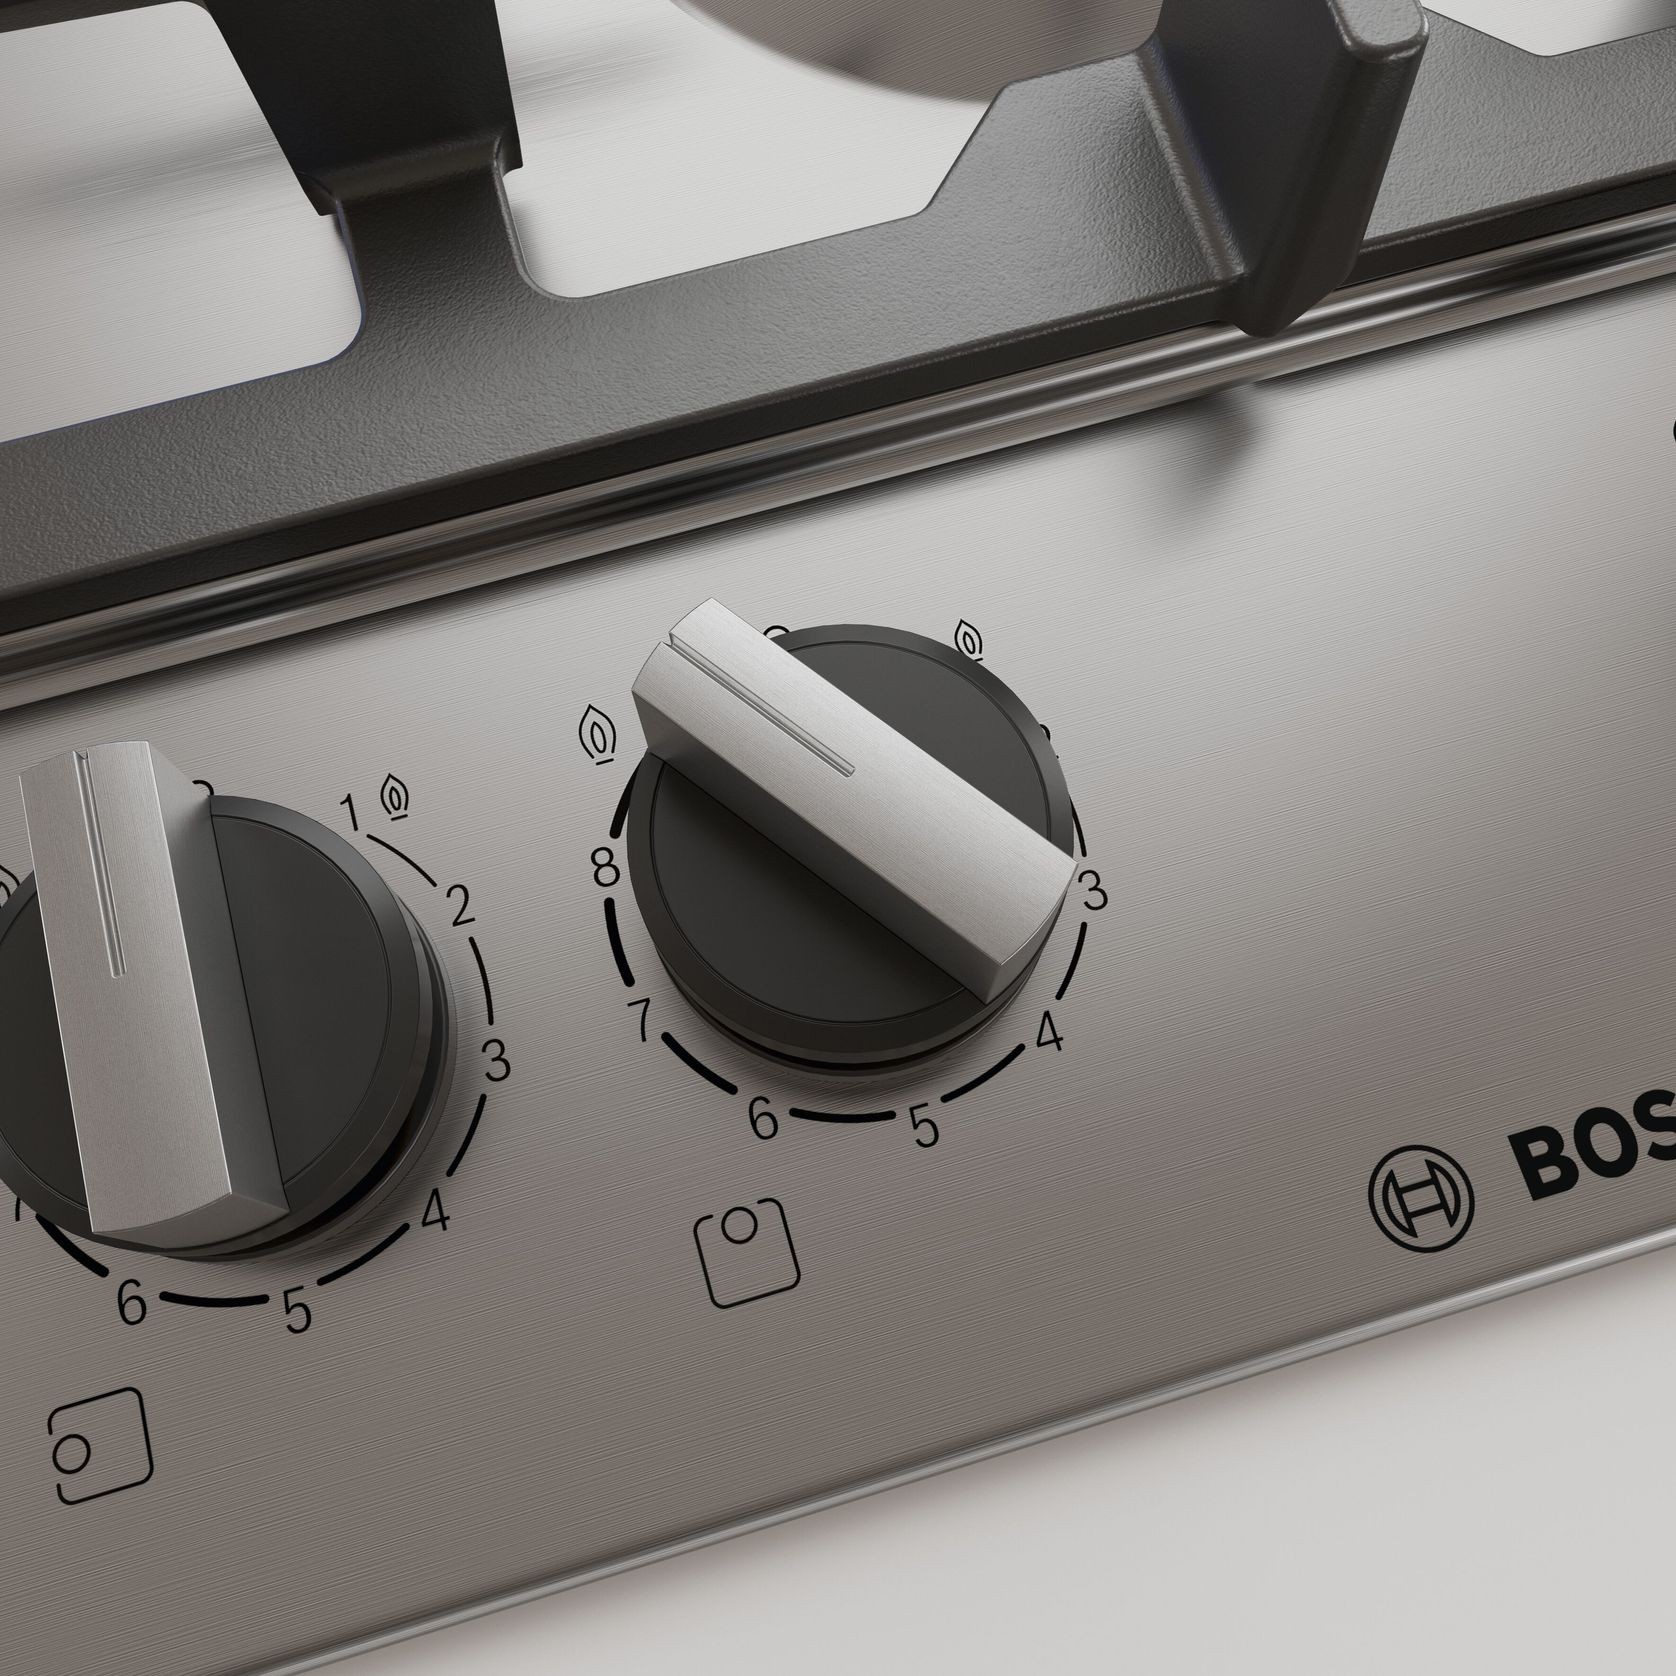 BOSCH | 60cm Stainless Steel Gas Cooktop gallery detail image